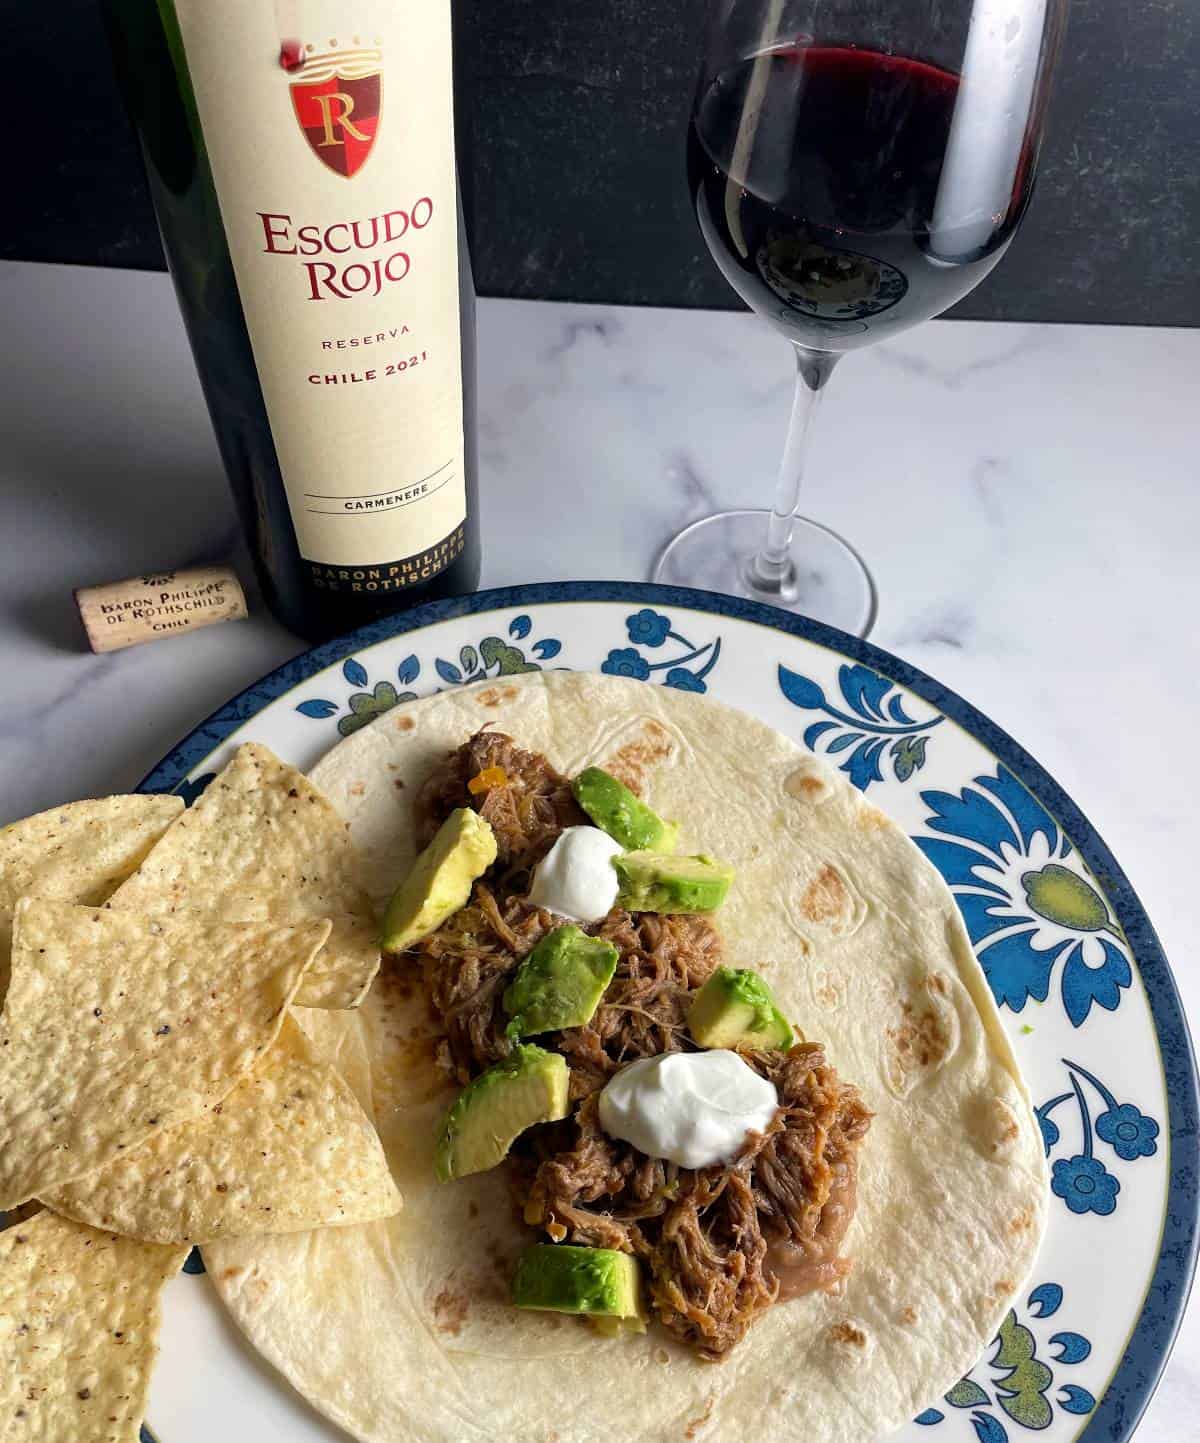 pulled pork tacos served with Escudo Rojo Carmenere from Chile.